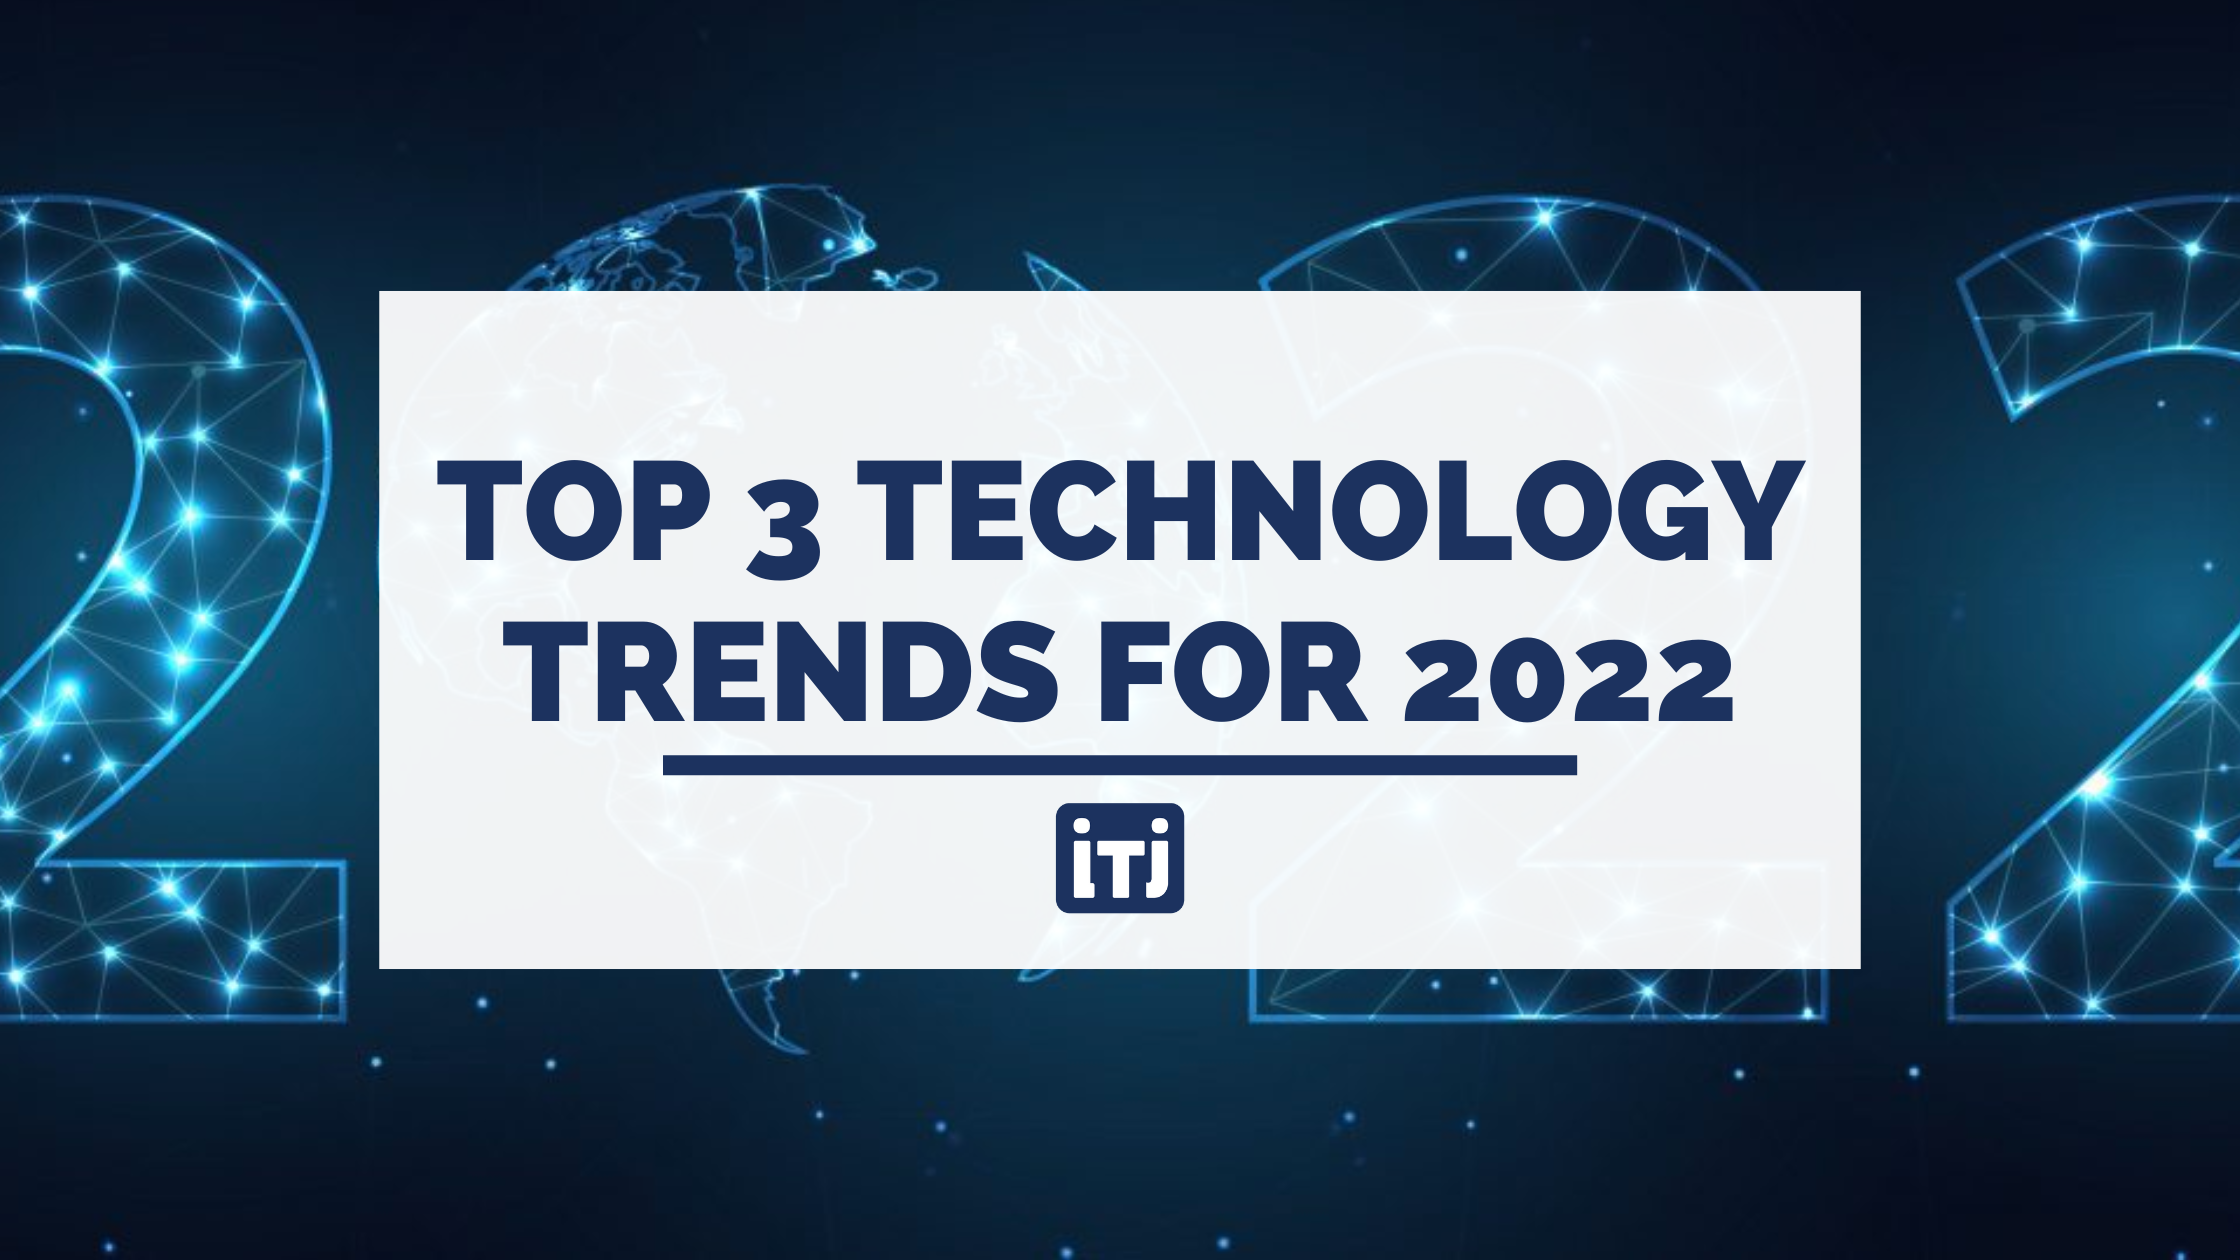 Top 3 technology trends for 2022 ITJ